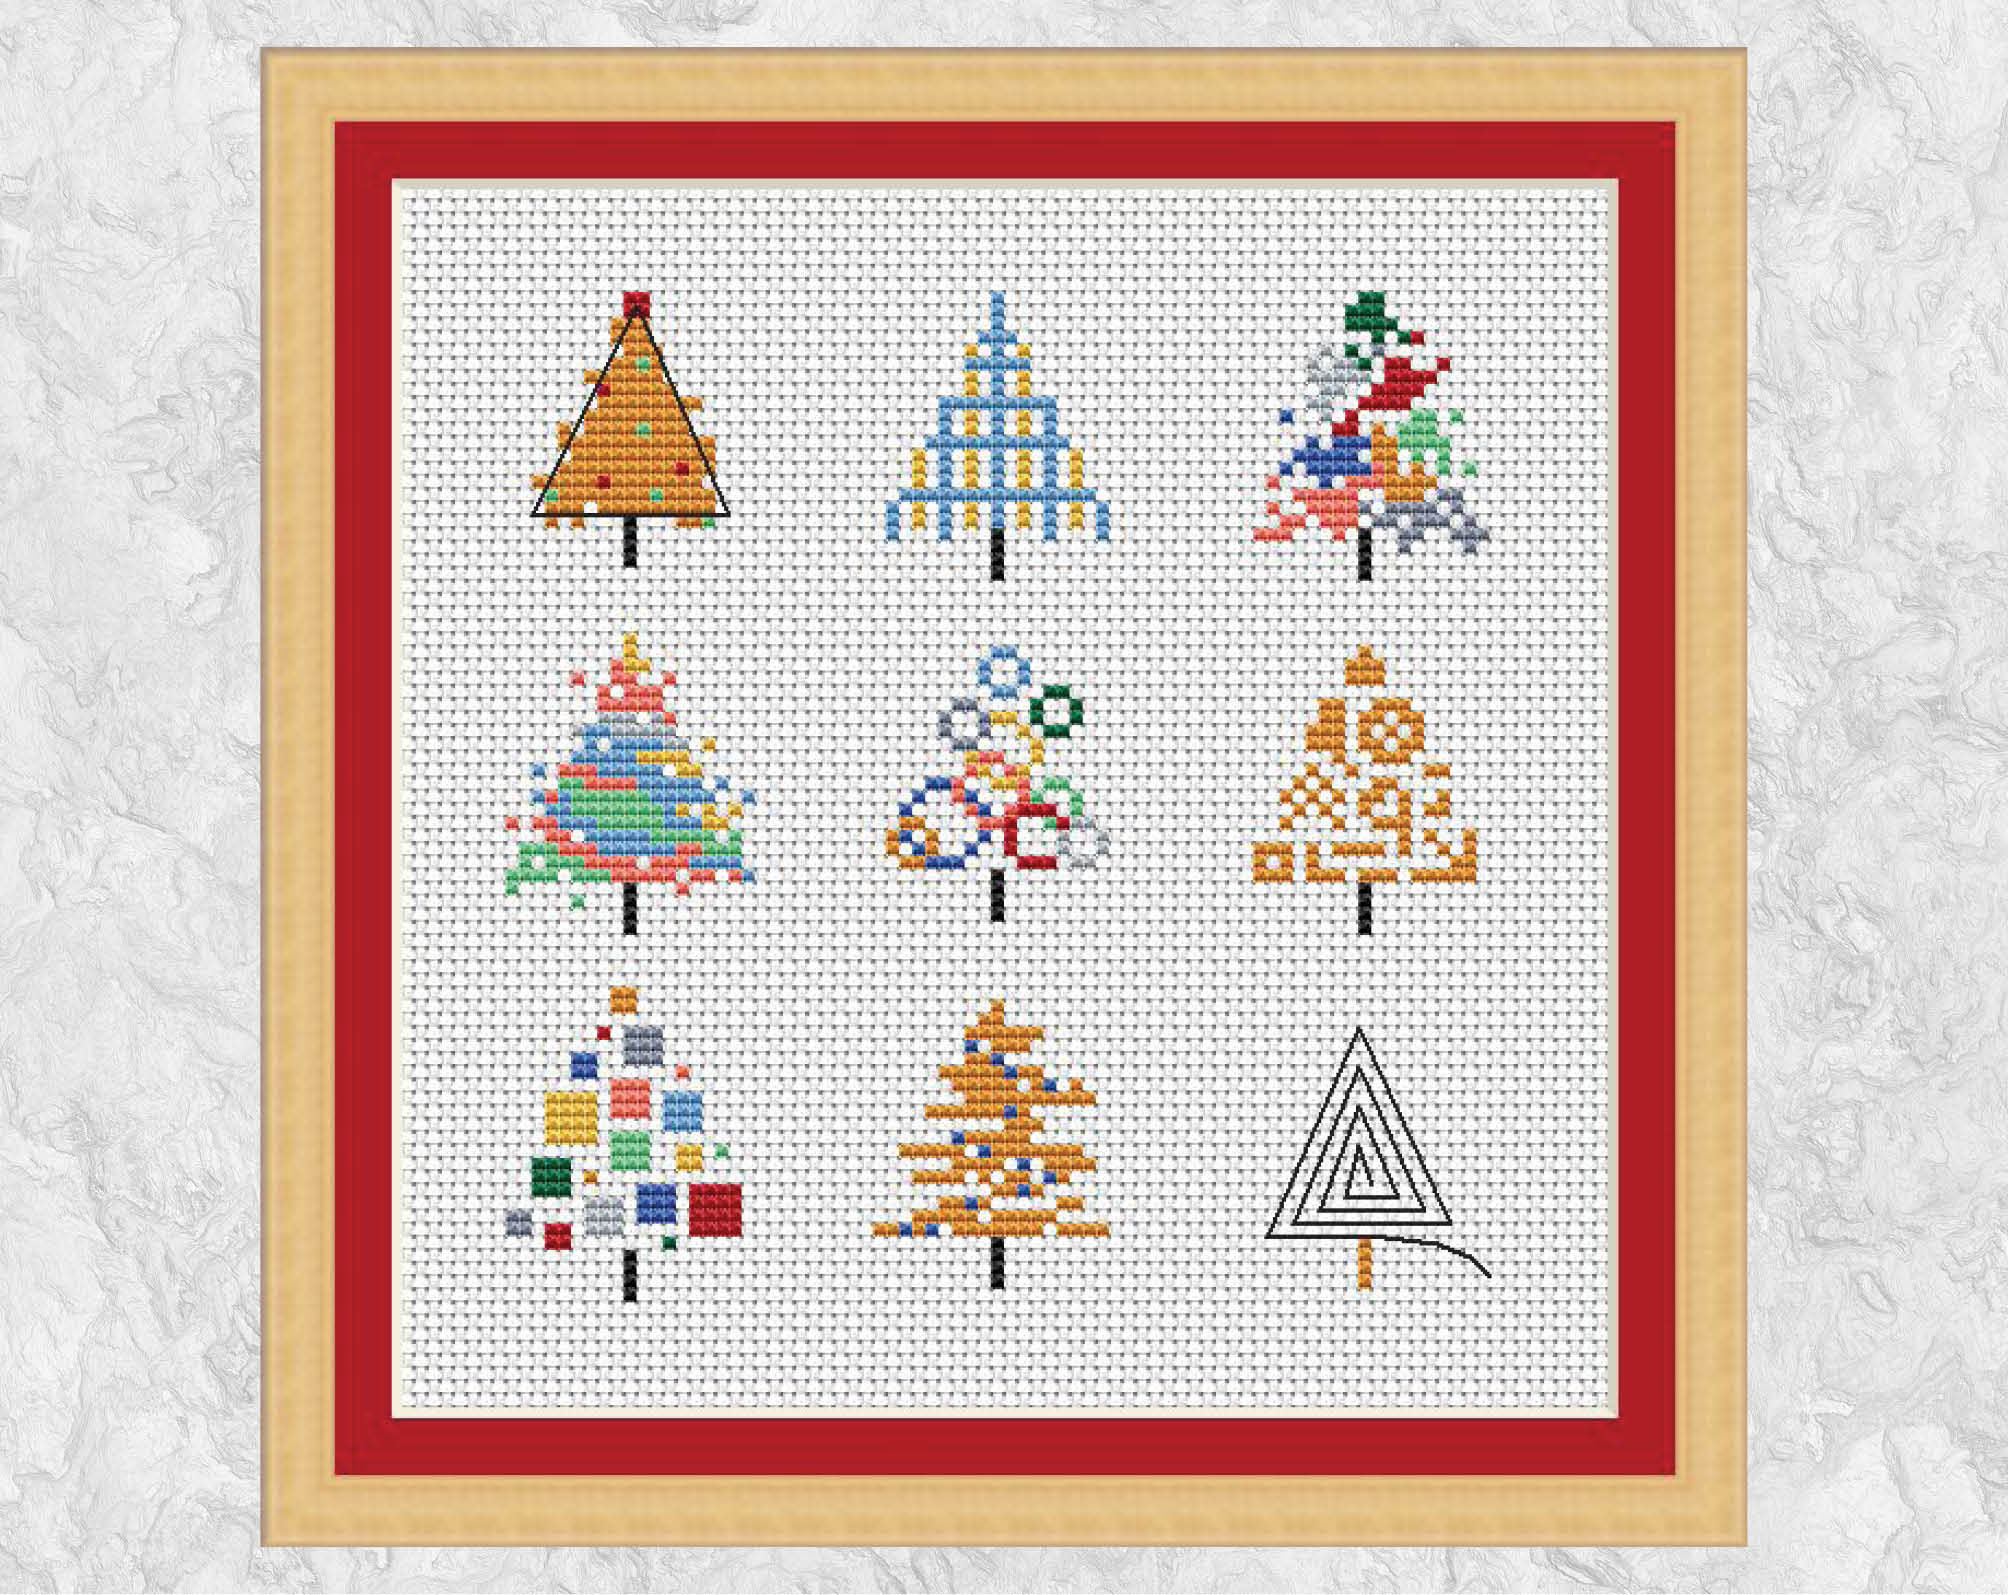 Embroidery Stitch Patterns Modern Christmas Cross Stitch Pattern Christmas Card Motifs Cute Mini Christmas Trees Small Easy Simple Fun Xmas Instant Download Pdf